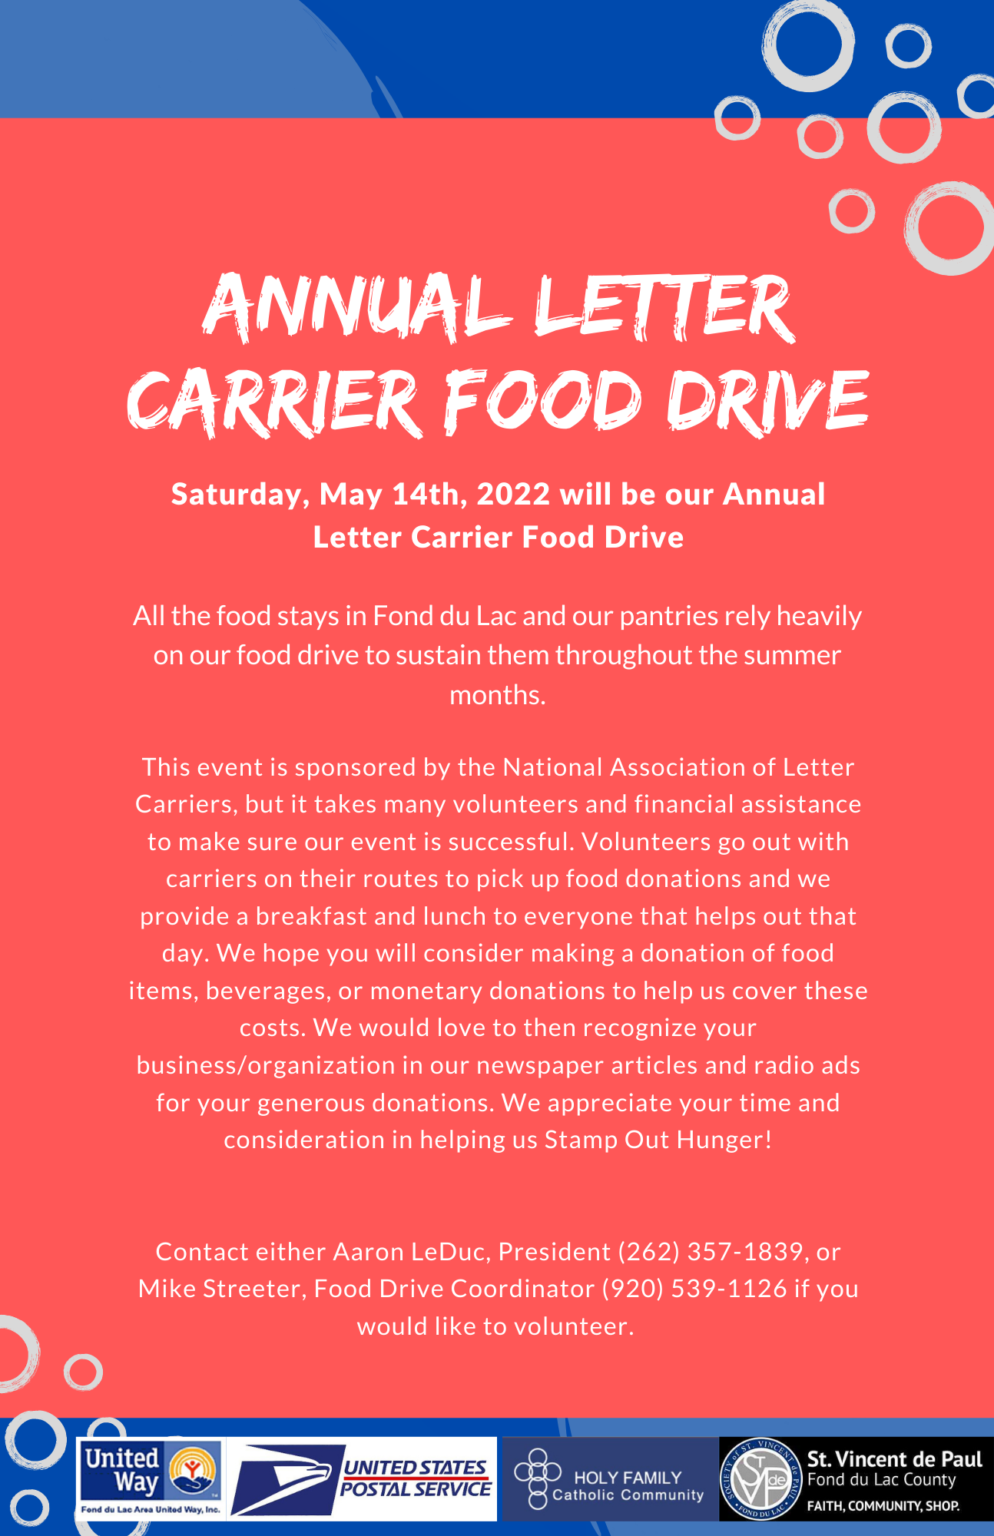 Annual Letter Carrier Food Drive FDL United Way